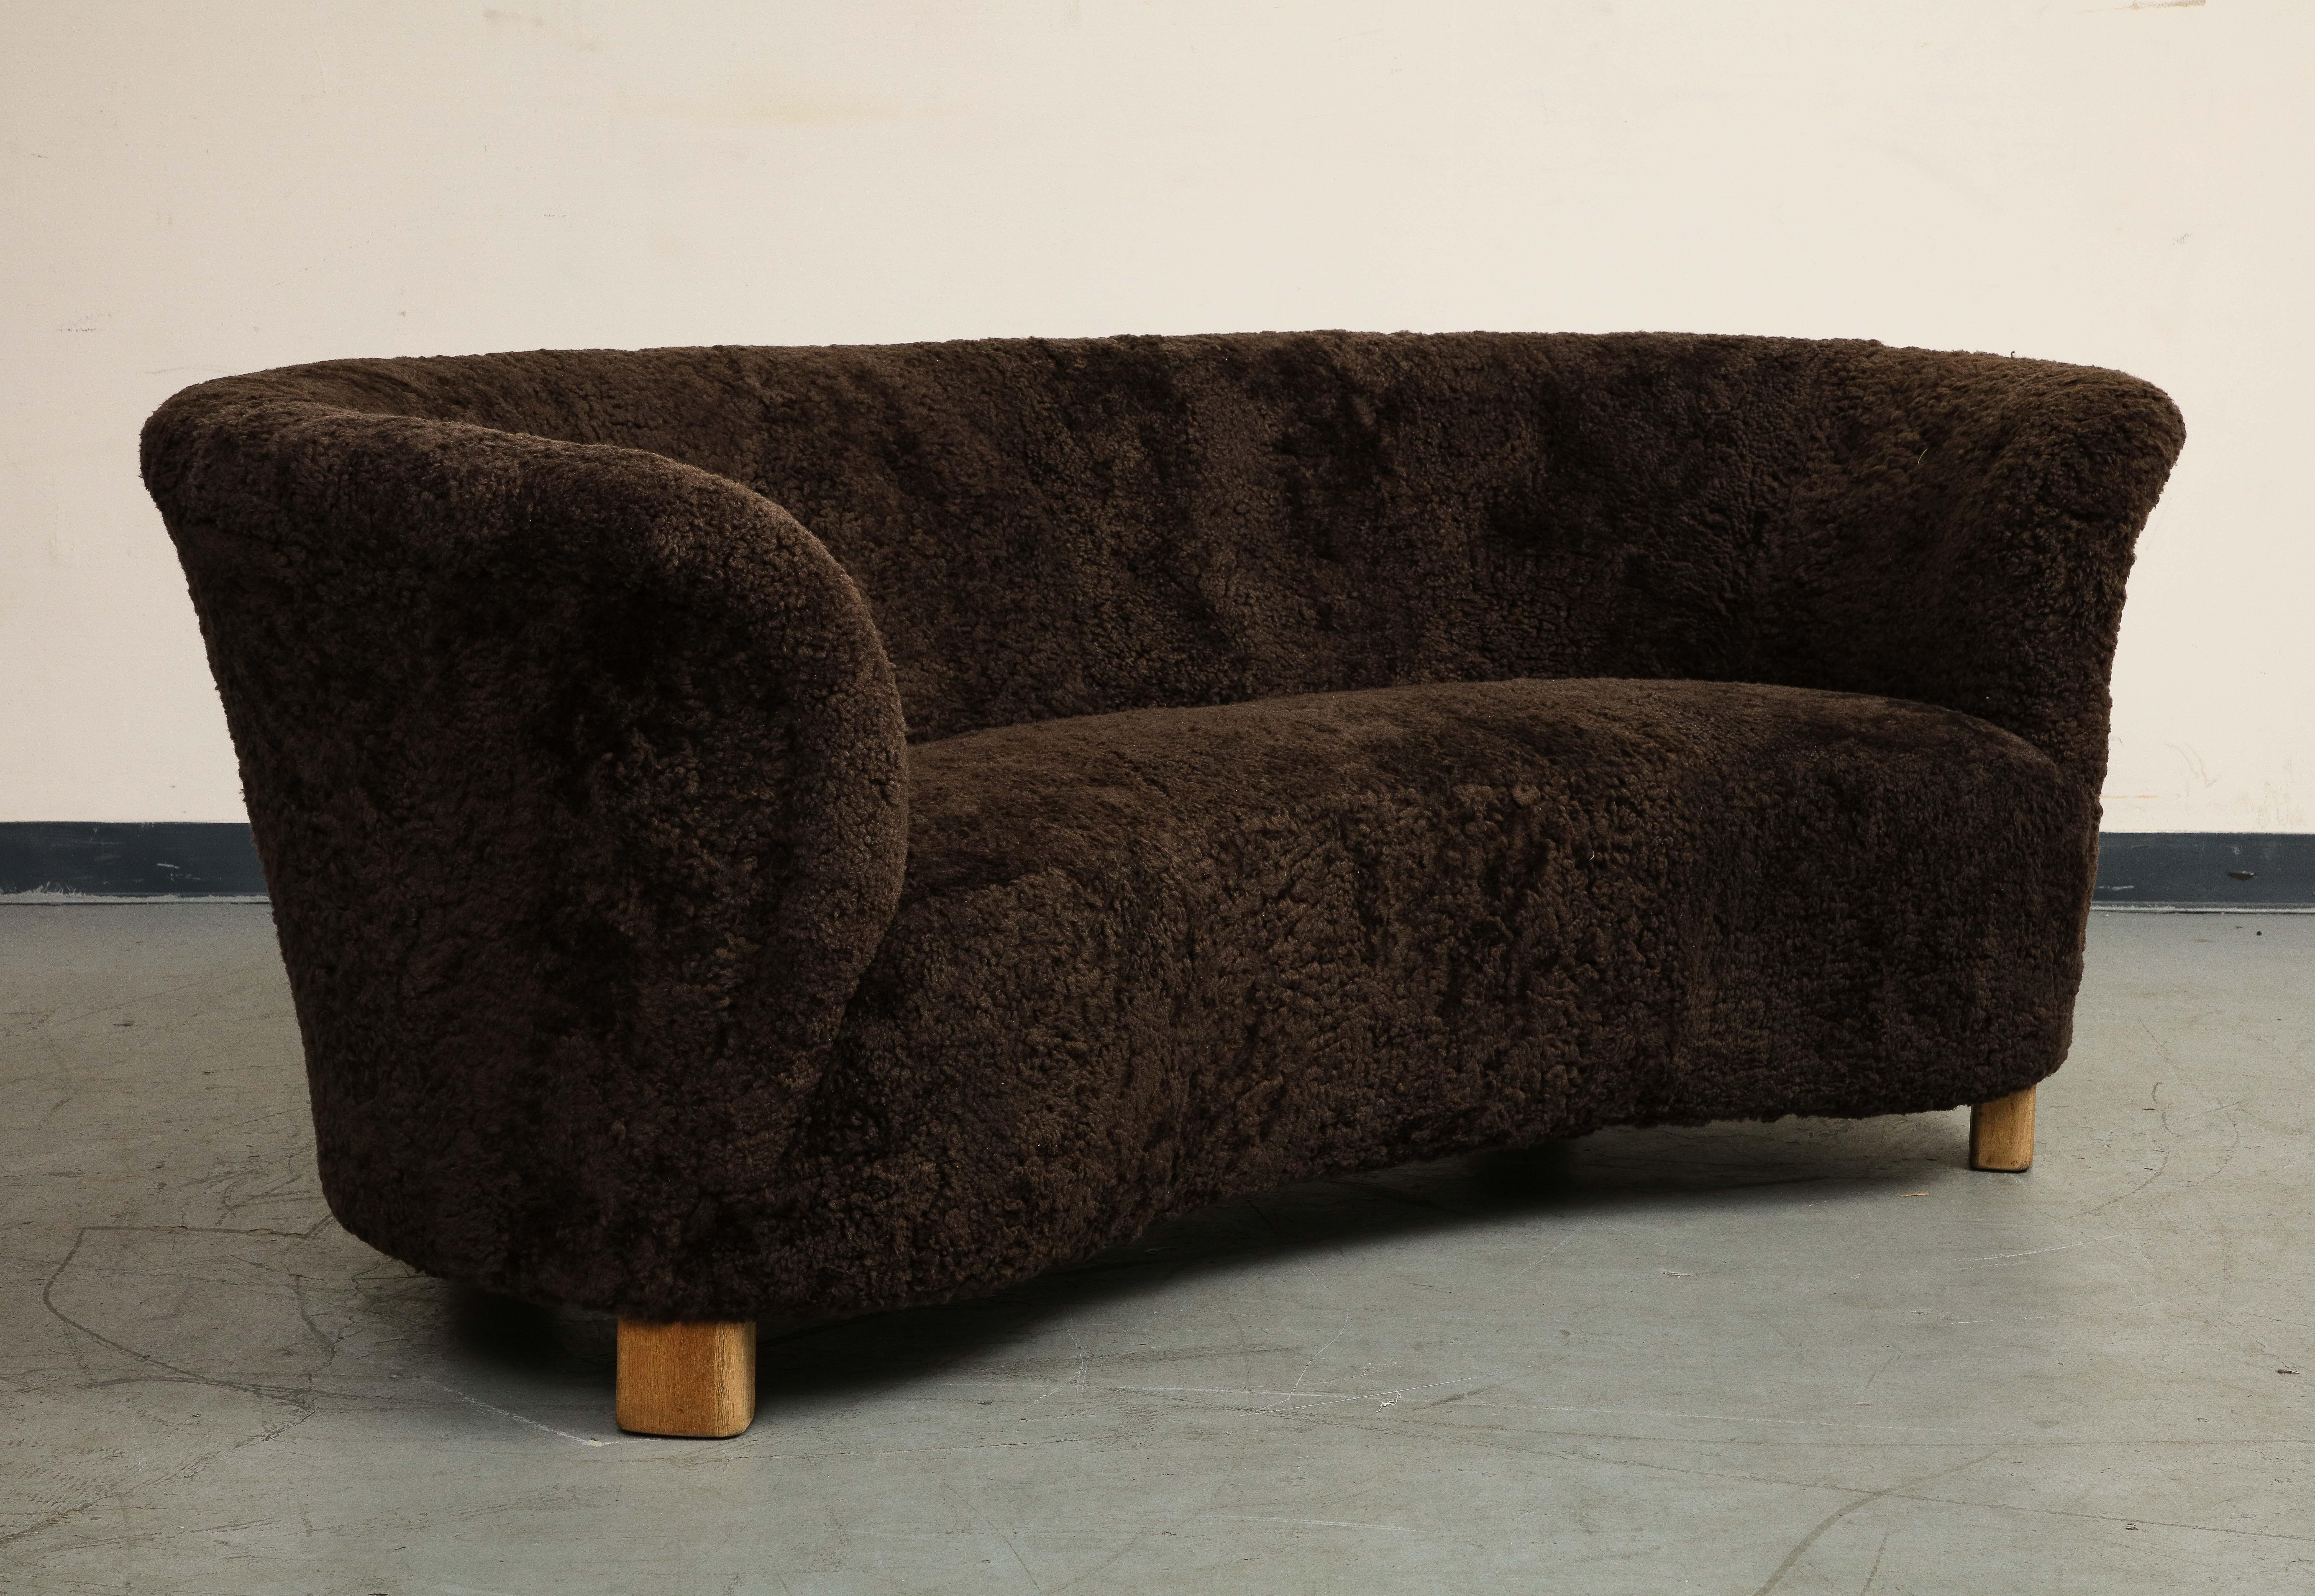 Mid-Century Modern Danish curved sofa, attributed to Flemming Lassen, circa 1940s. Beautiful condition. Newly upholstered in dark brown European shearling, oak block feet. Provenance: Hostler Burrows.